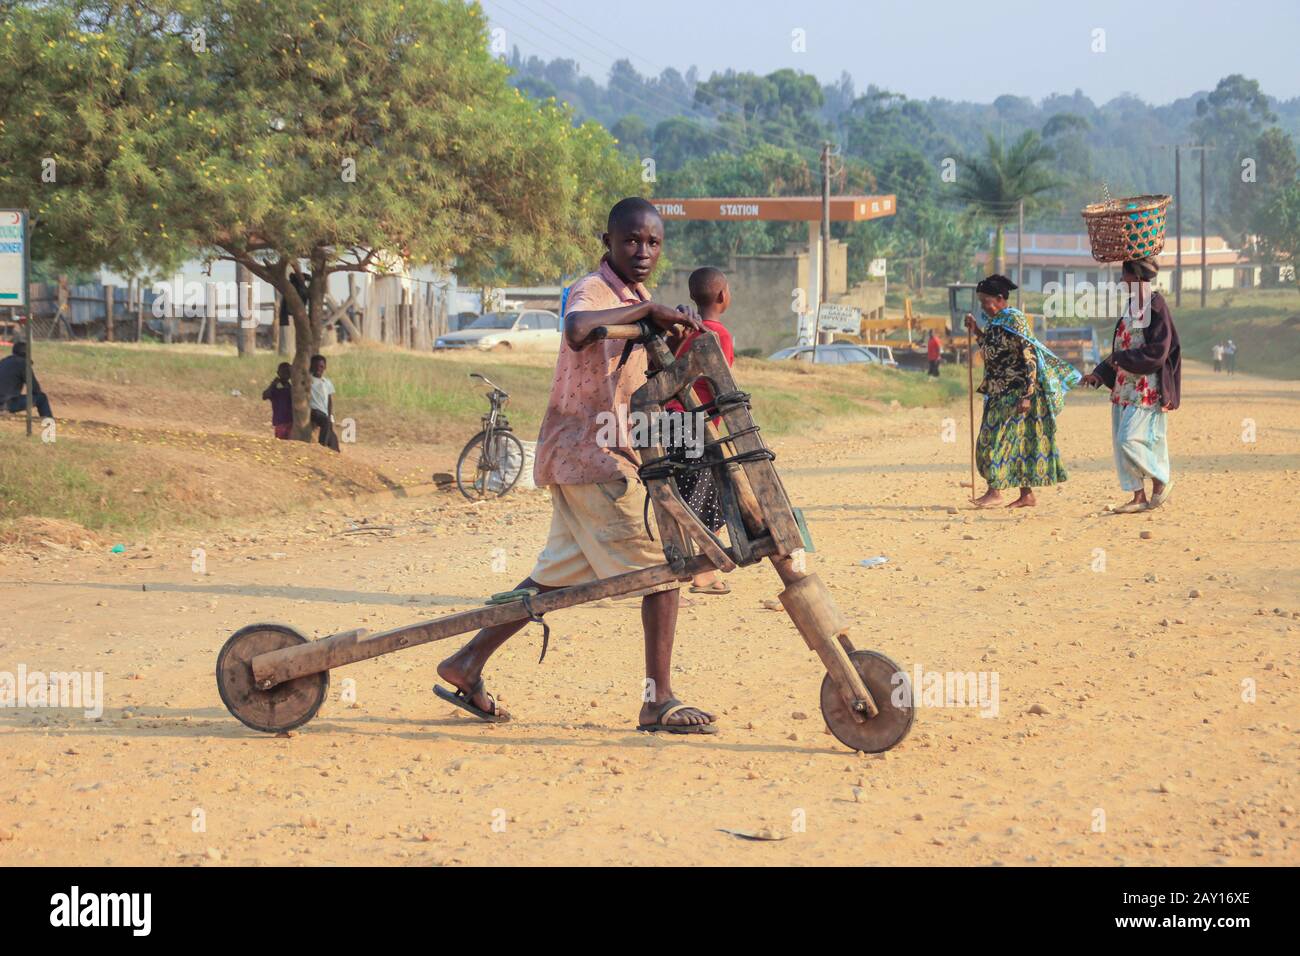 Kampala, Uganda - January 31, 2015: Home-made wooden children's scooters are used to carry goods by children in Africa. Poor African childhood and chi Stock Photo